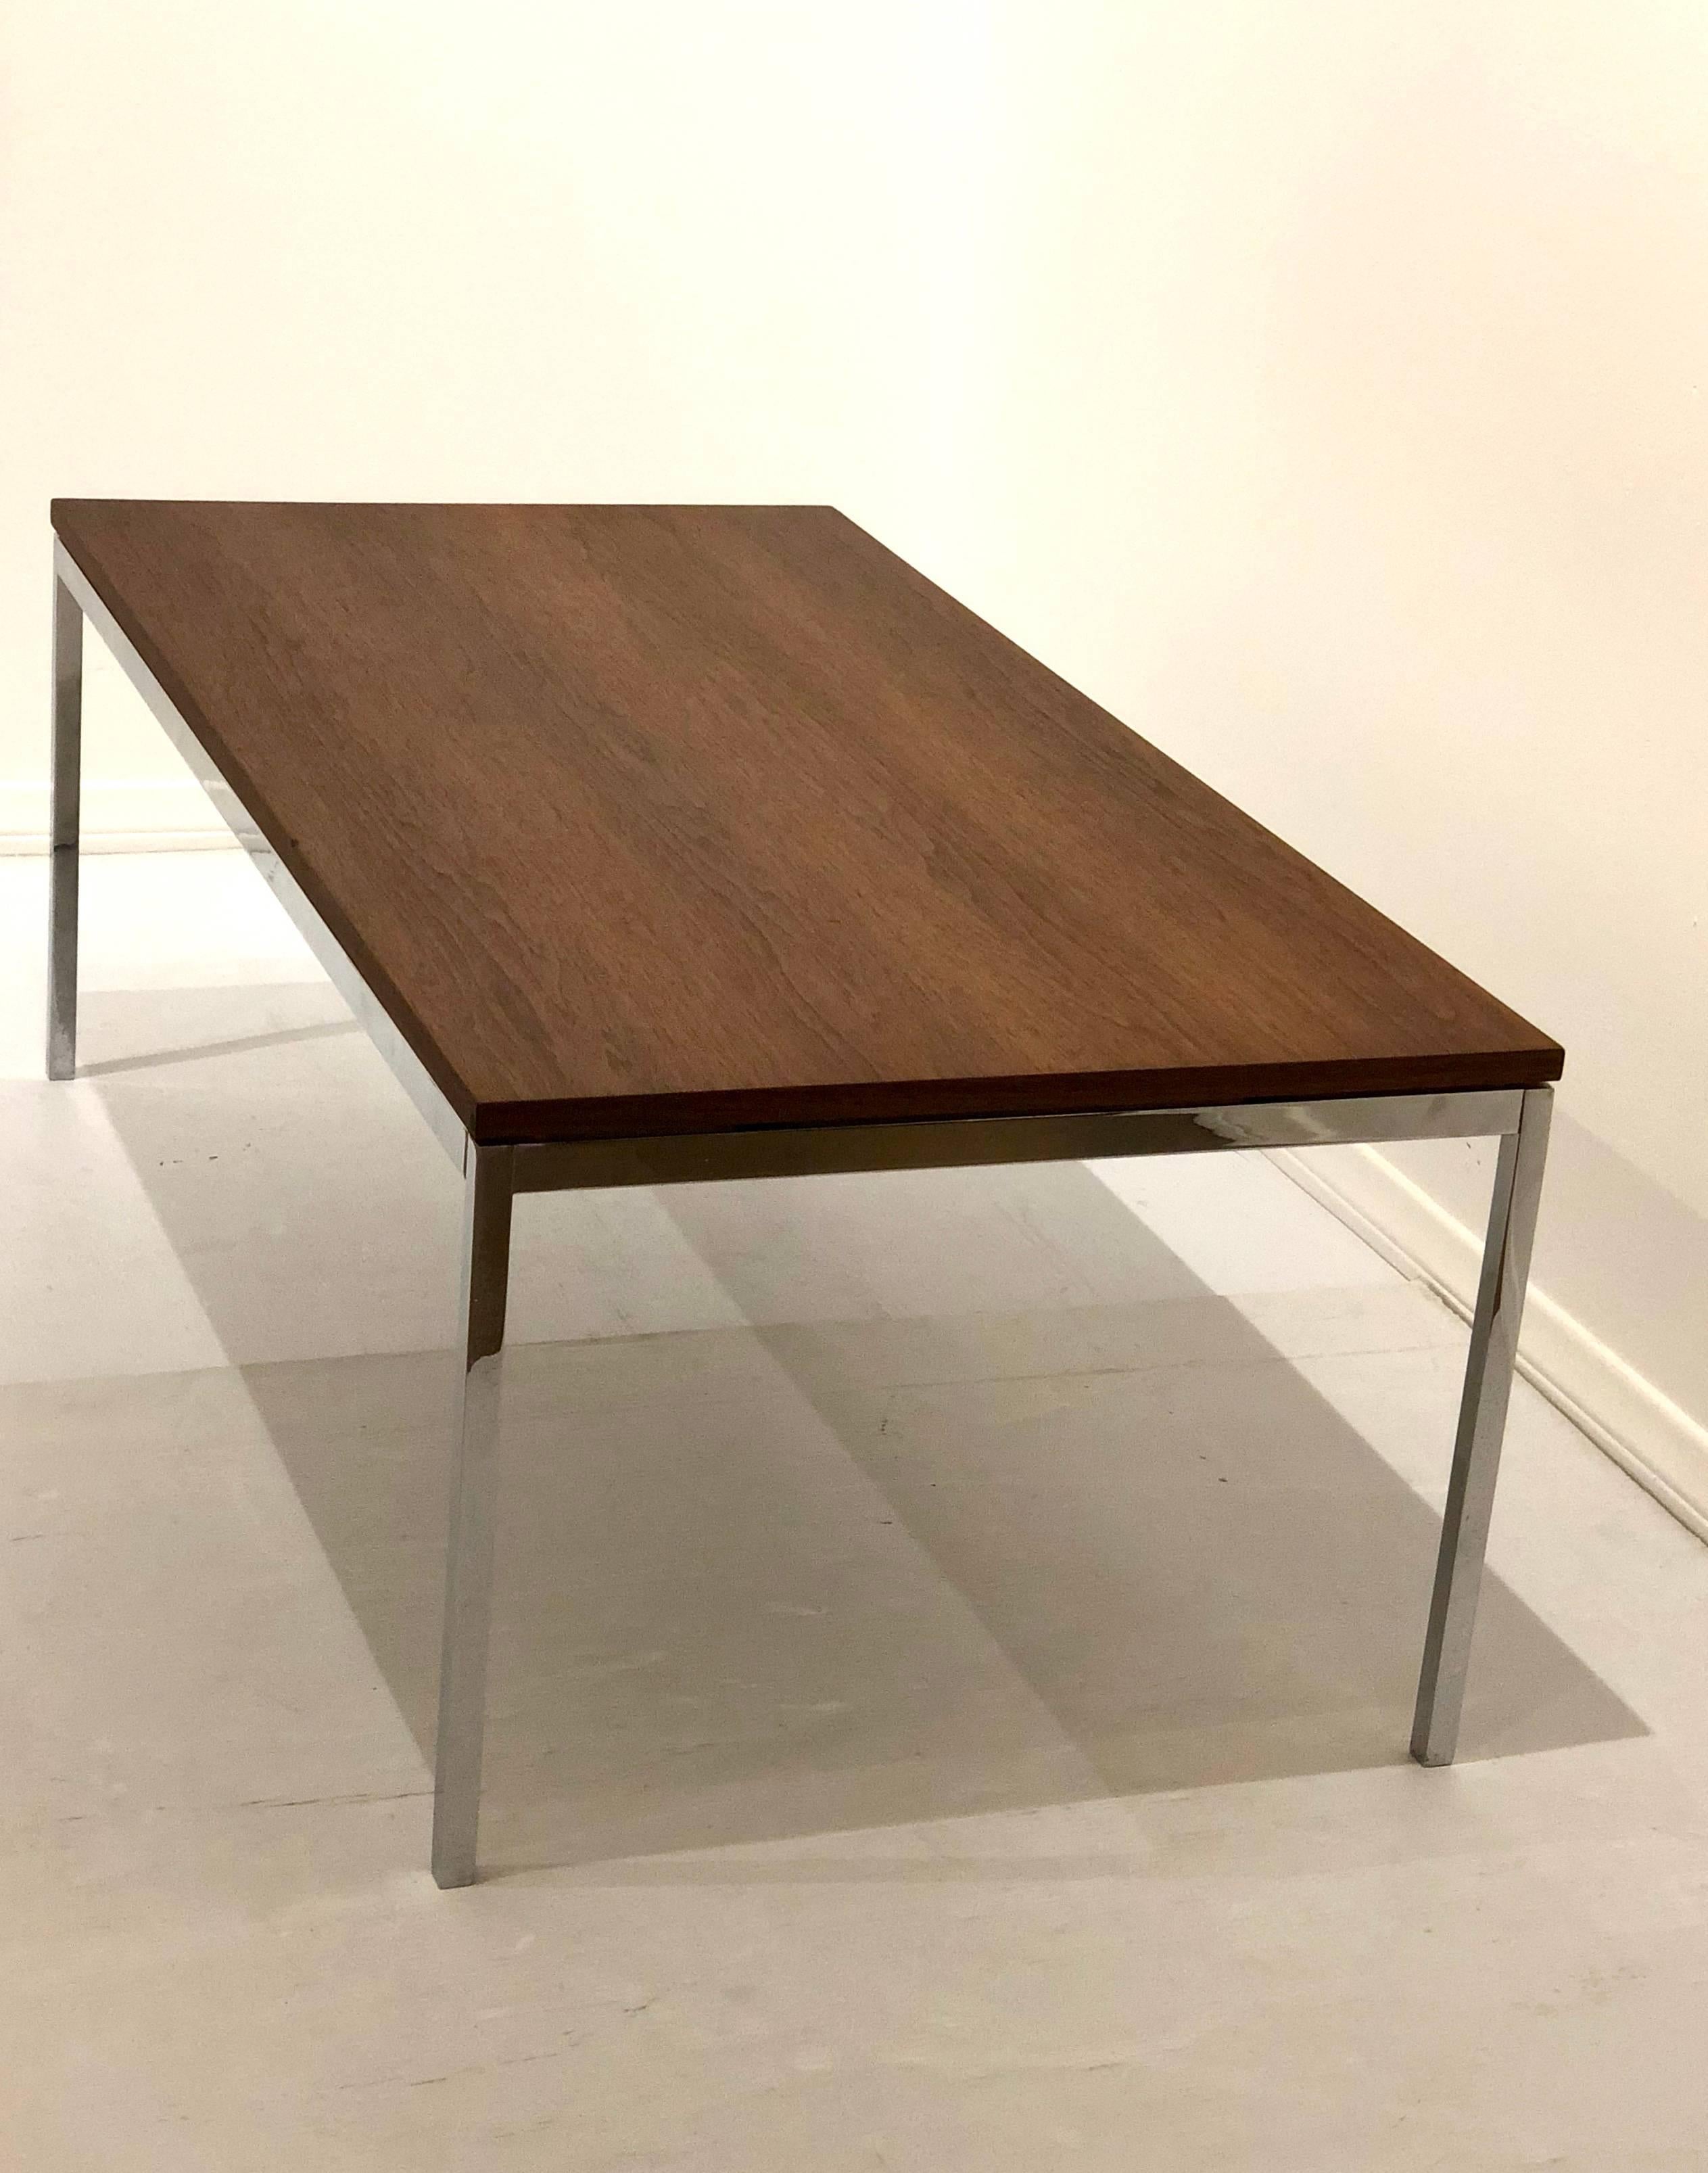 Simple elegant chrome-plated steel coffee table by Knoll, circa 1970s freshly refinished top and polished the base retains original early production label.